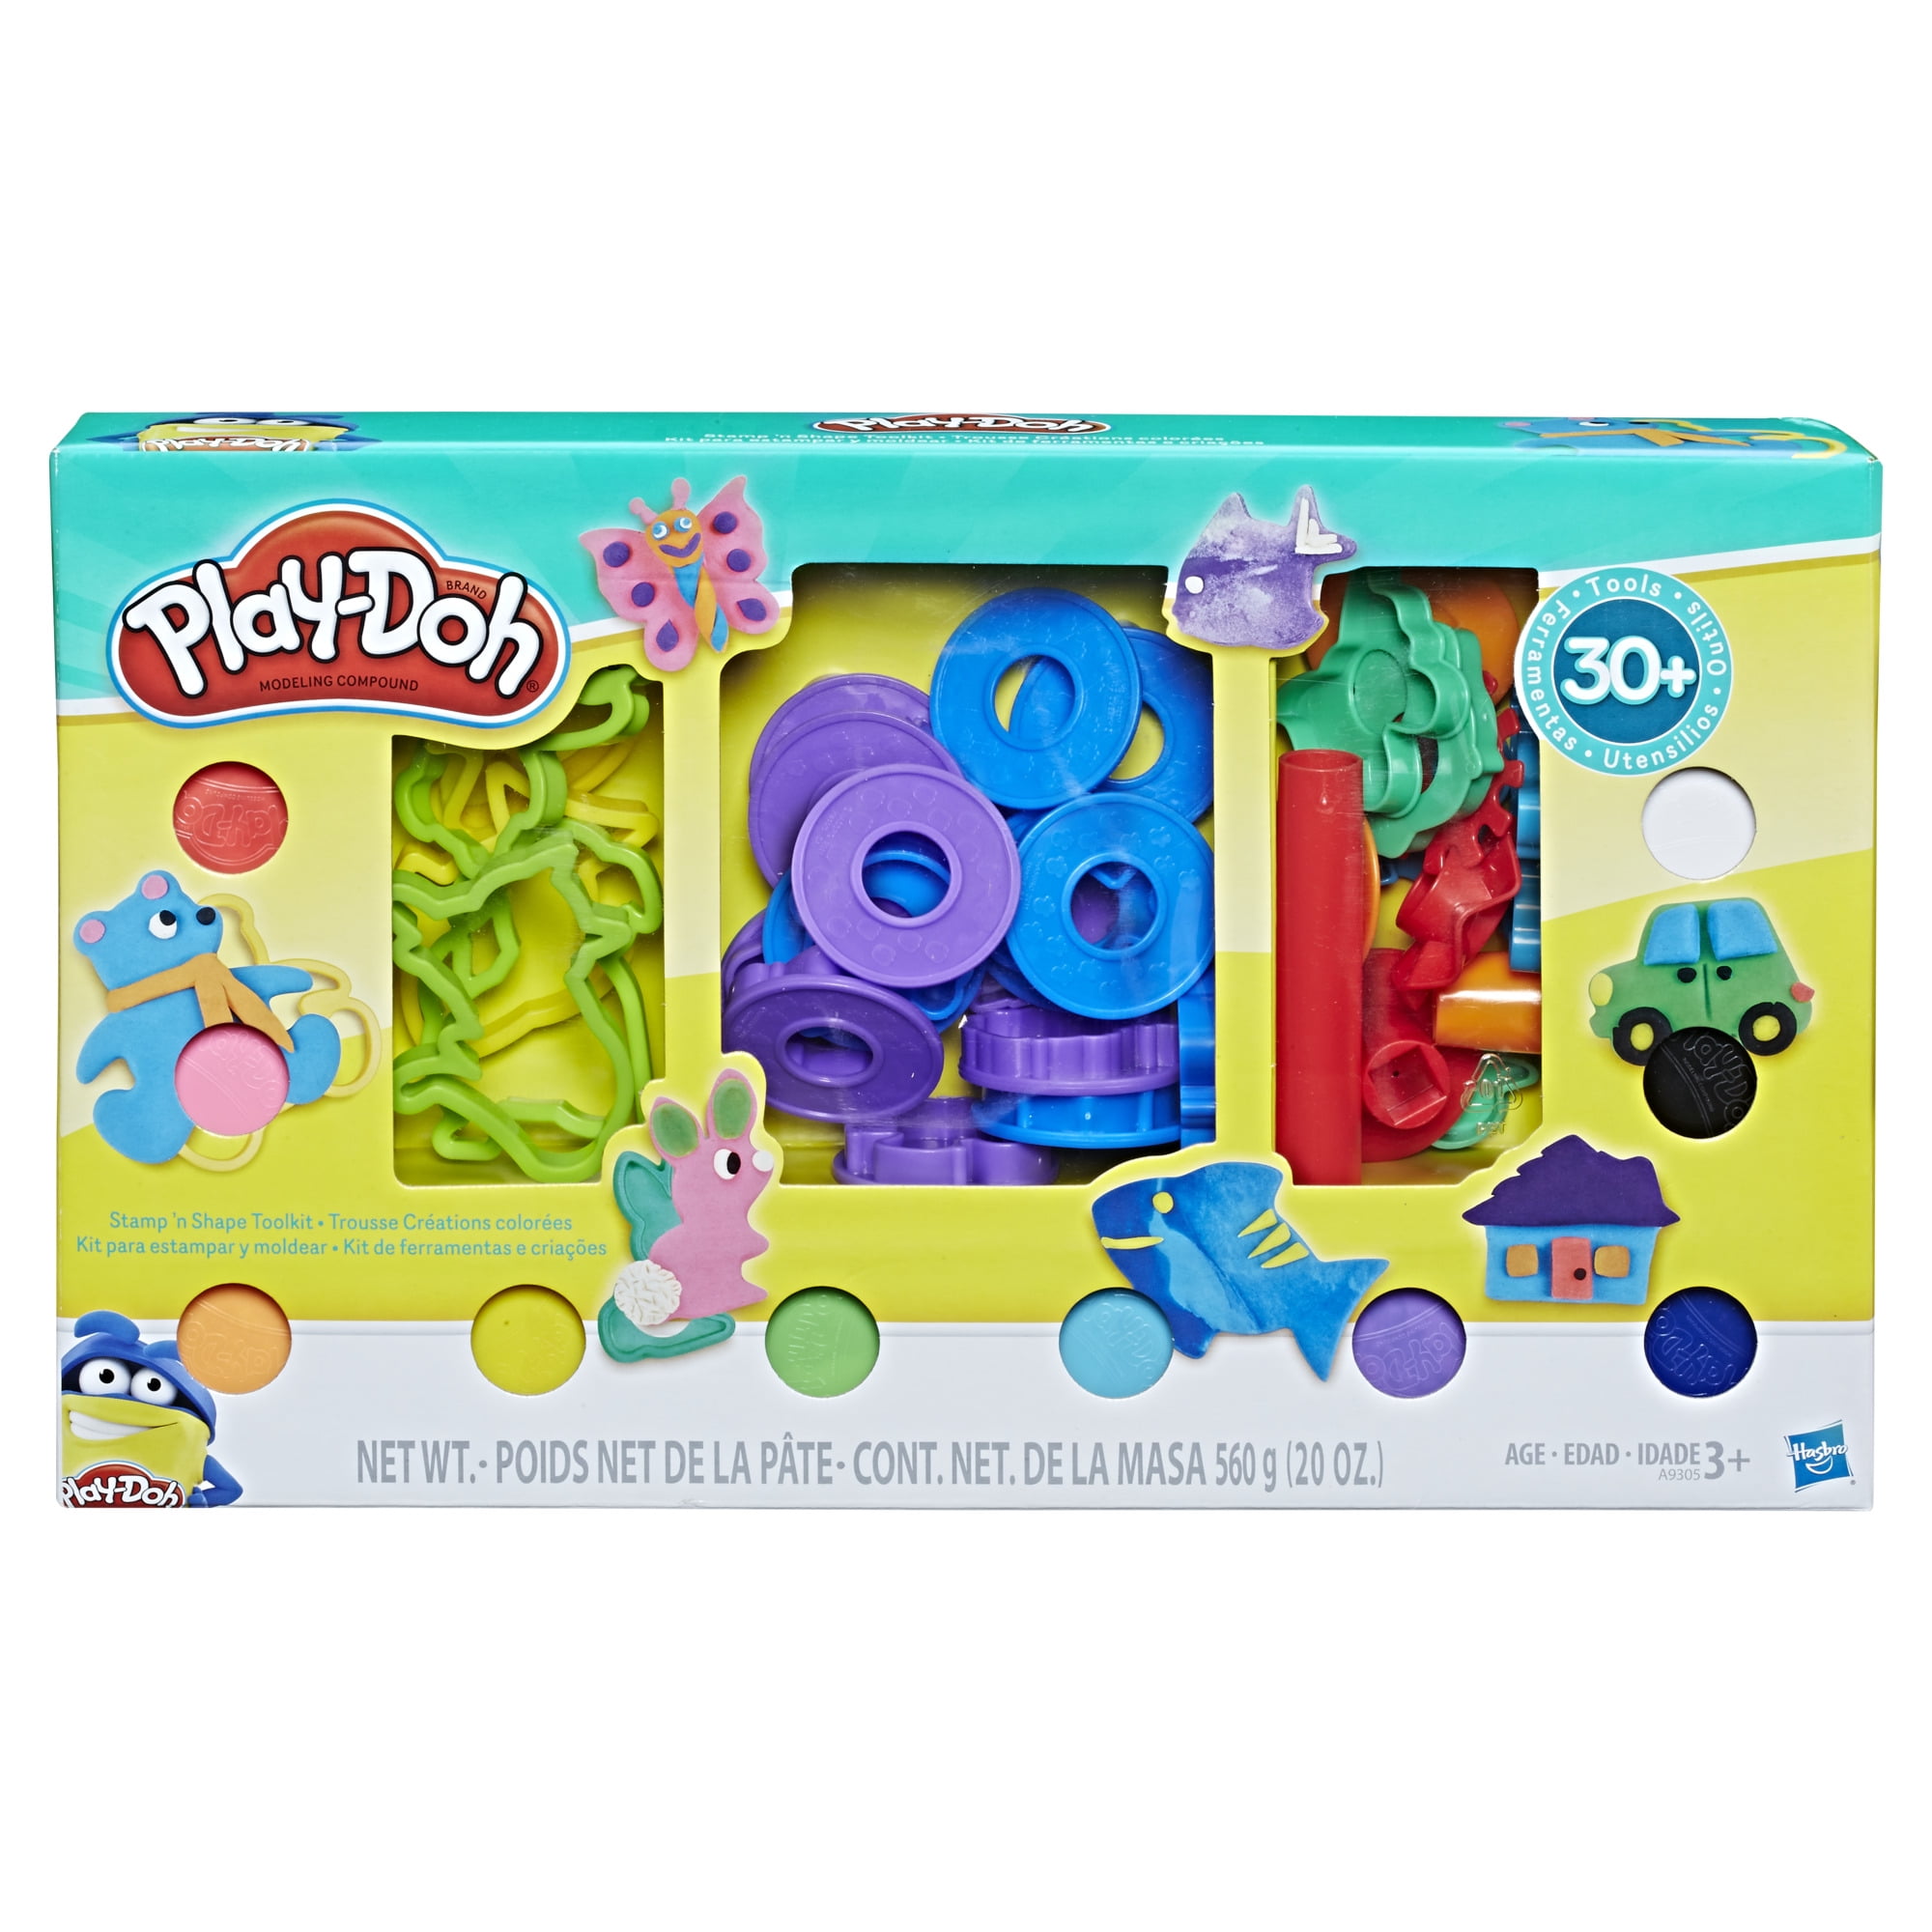 Play-Doh Stamp n Shape Toolkit 34-Piece Play-Doh Set, 10 Cans